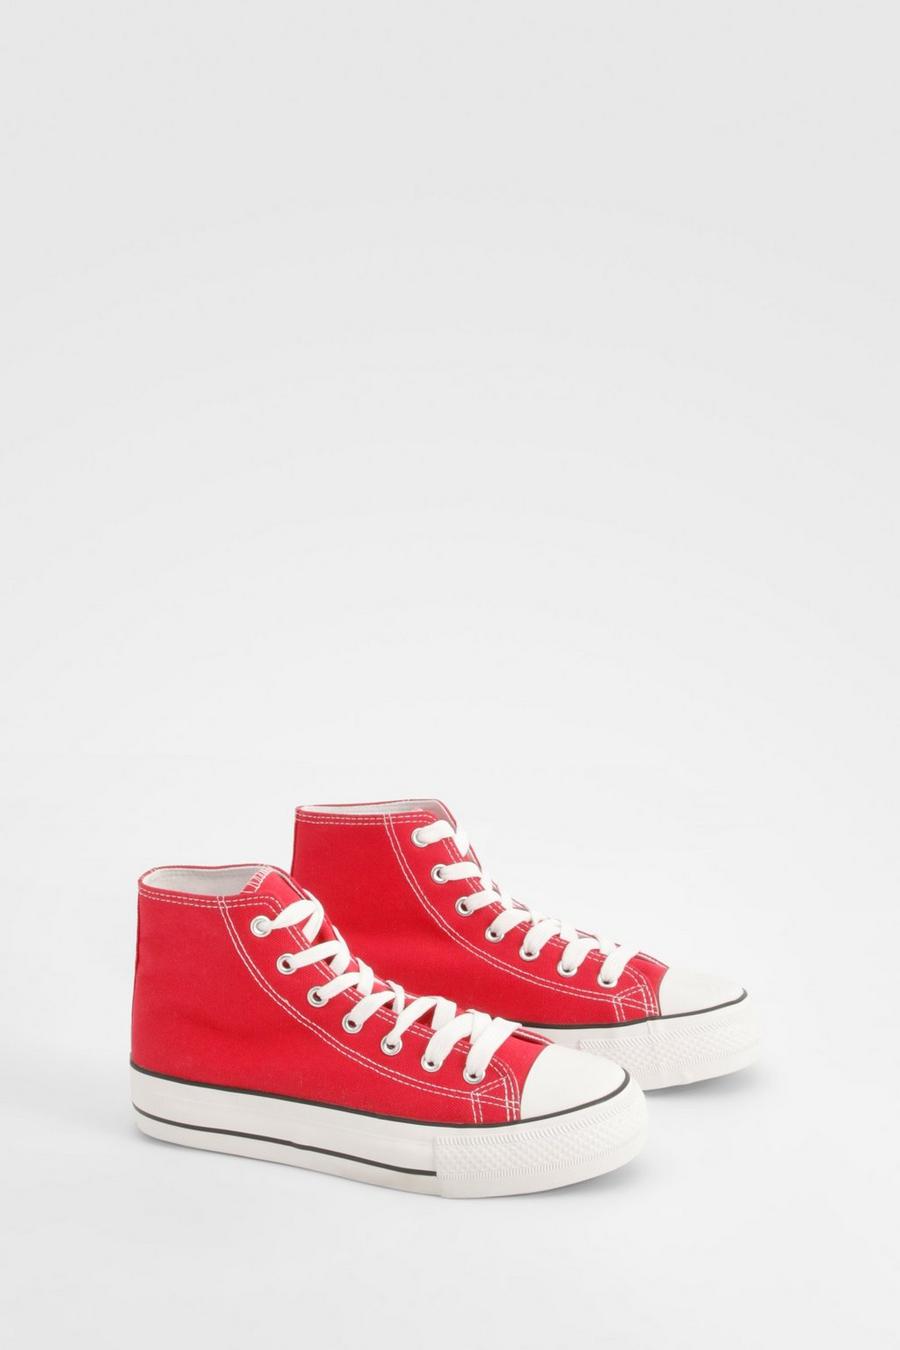 Red Platform High Top Lace Up Trainers   